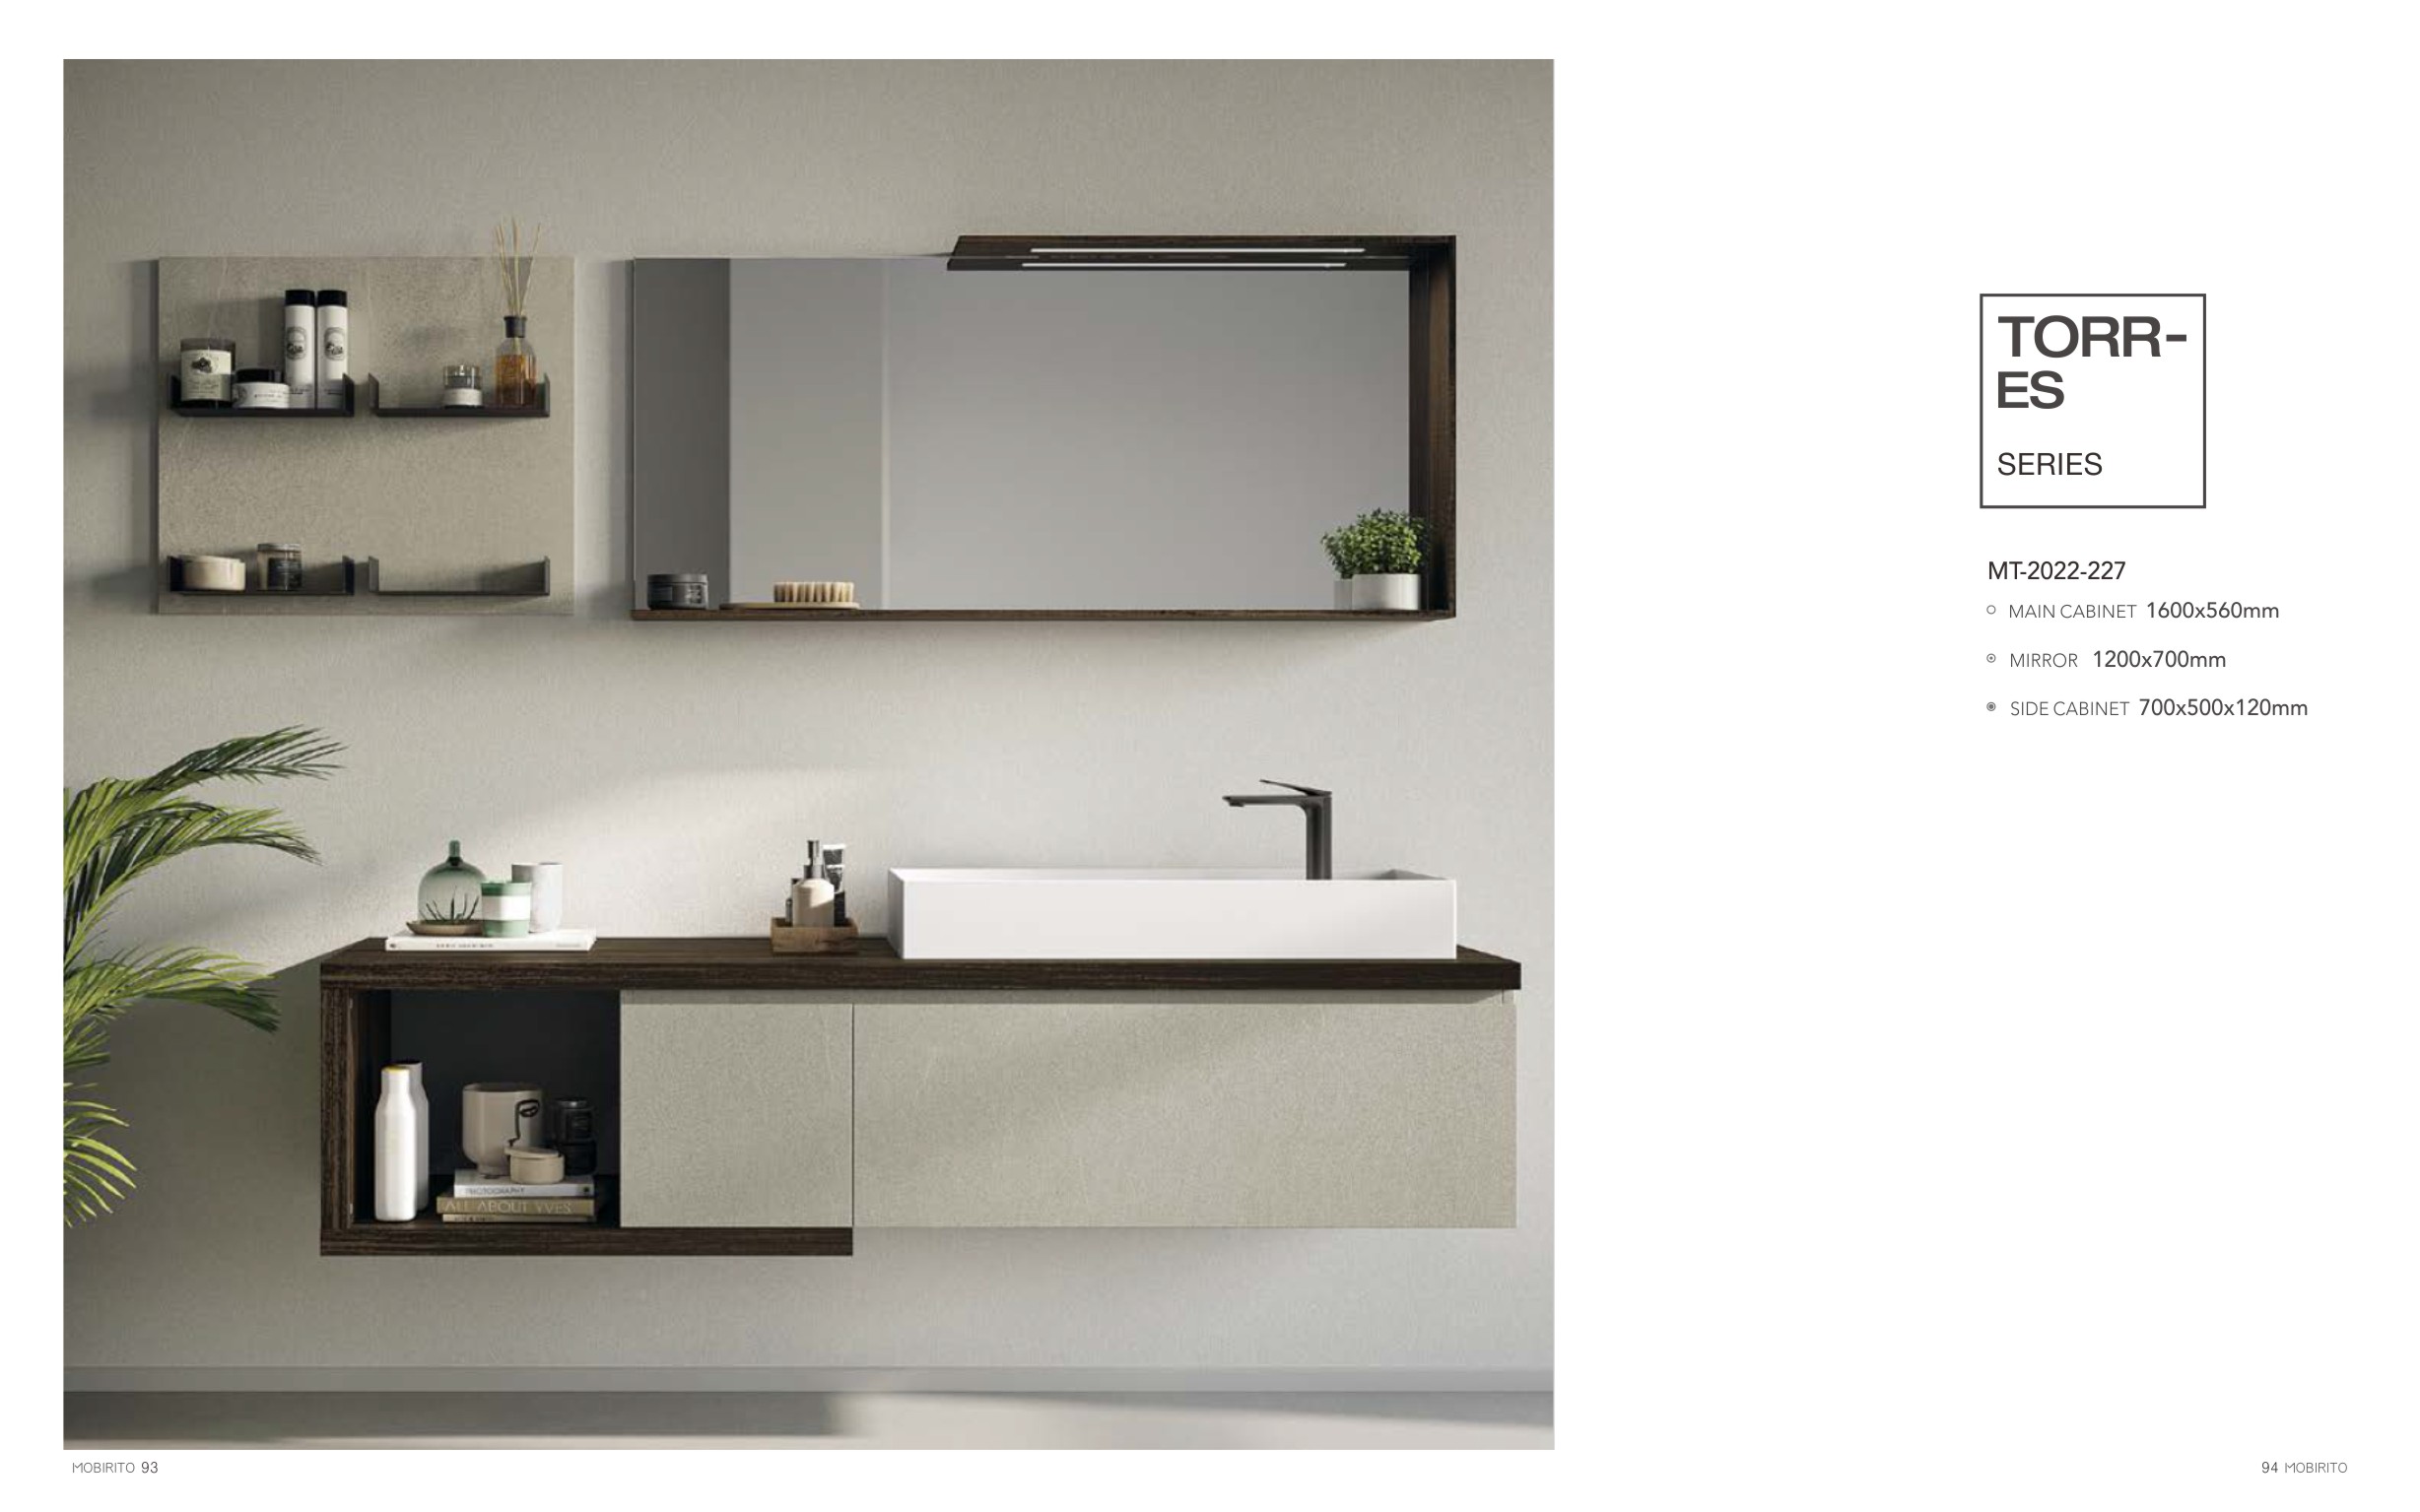 Stylish and Functional High Gloss Vanity Unit - Elevate Your Bathroom Décor